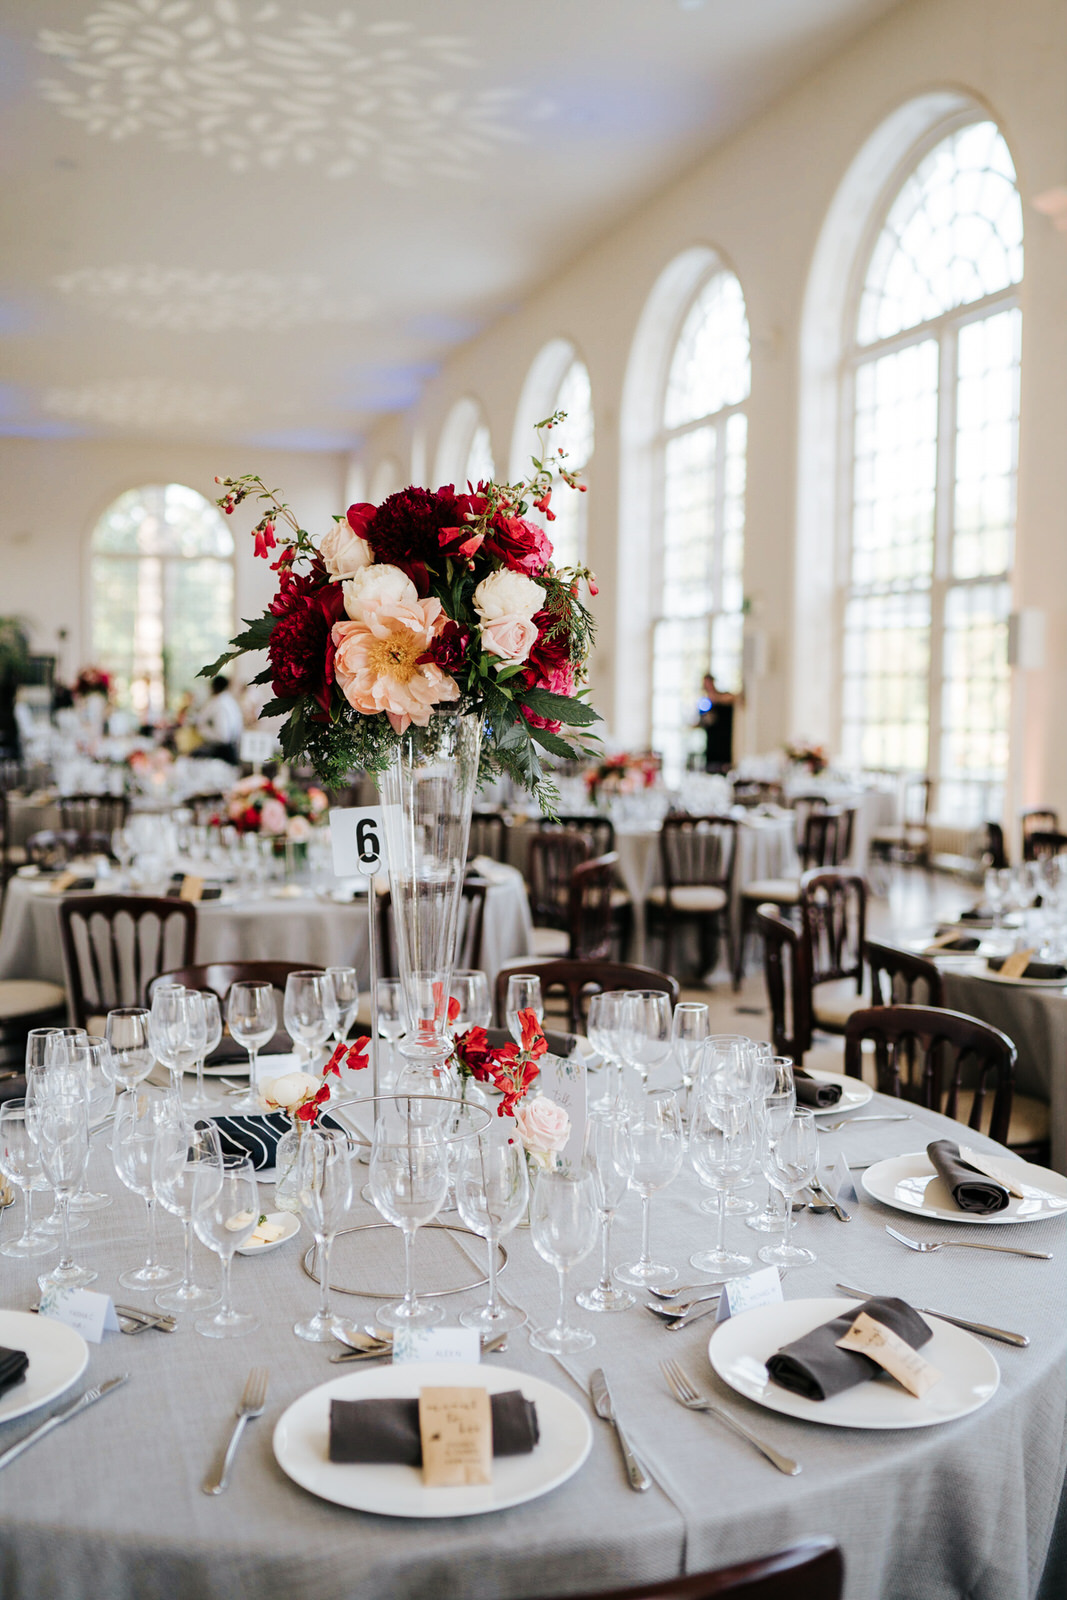  Wide shot of table setup for wedding breakfast at the orangery in kew gardens focusing on beautiful red and white flower centrepieces 